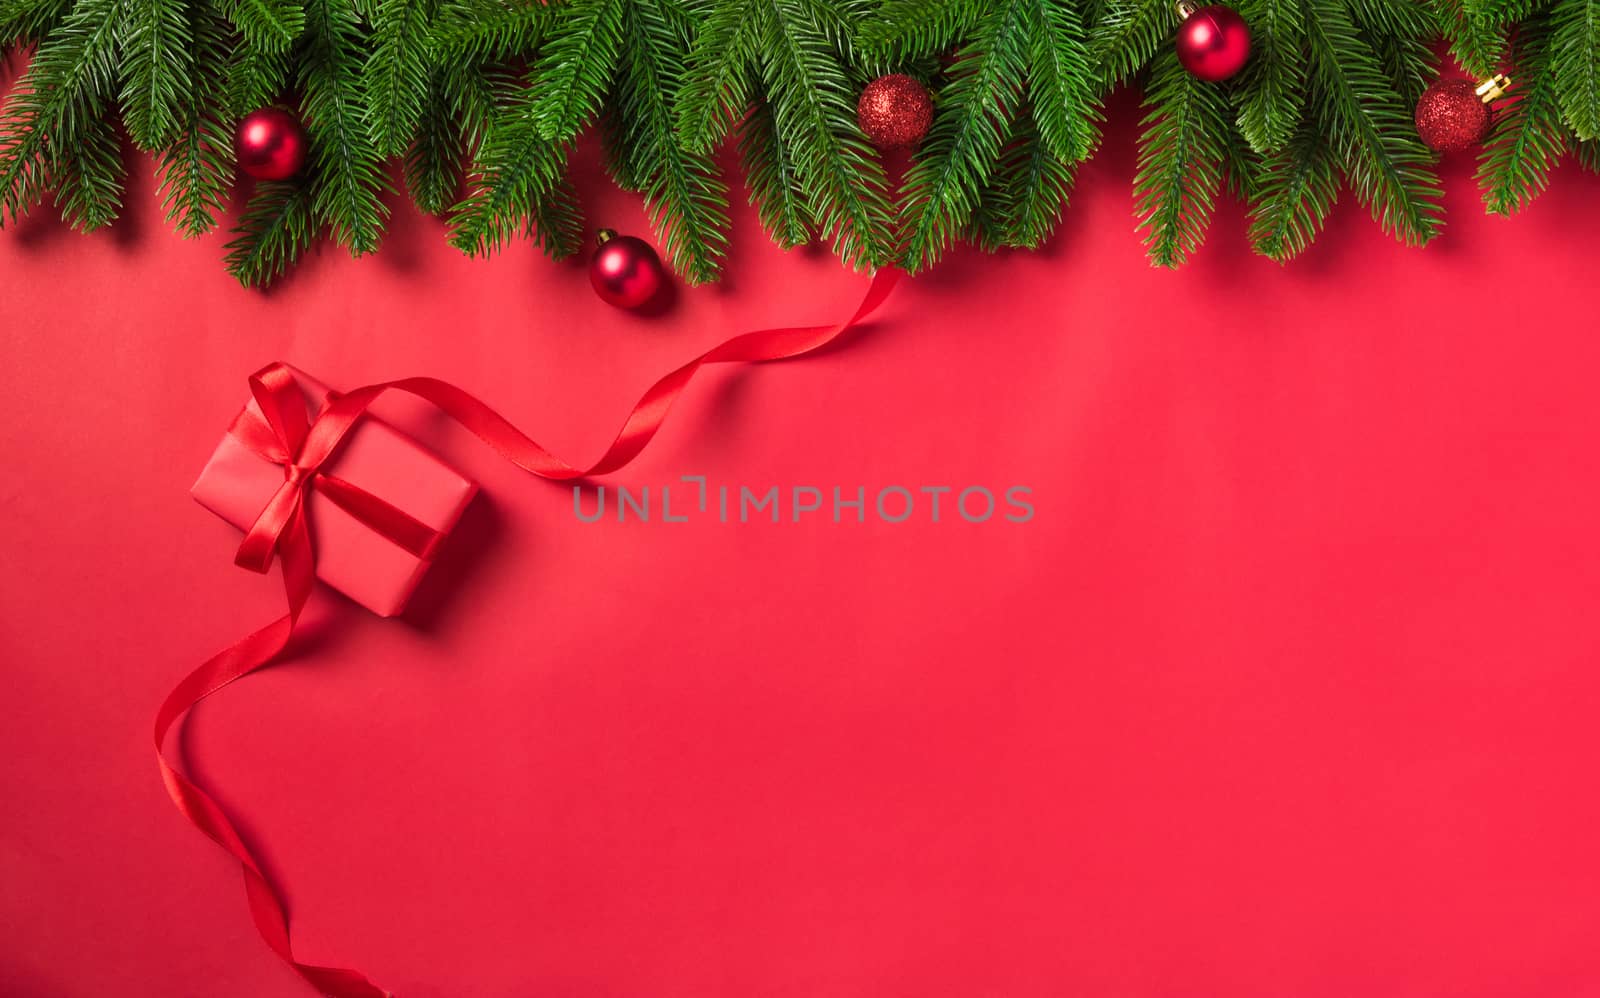 Christmas holiday background with gift box decorations composition, Top view fir green fir tree branches and Xmas ornaments on a red table background